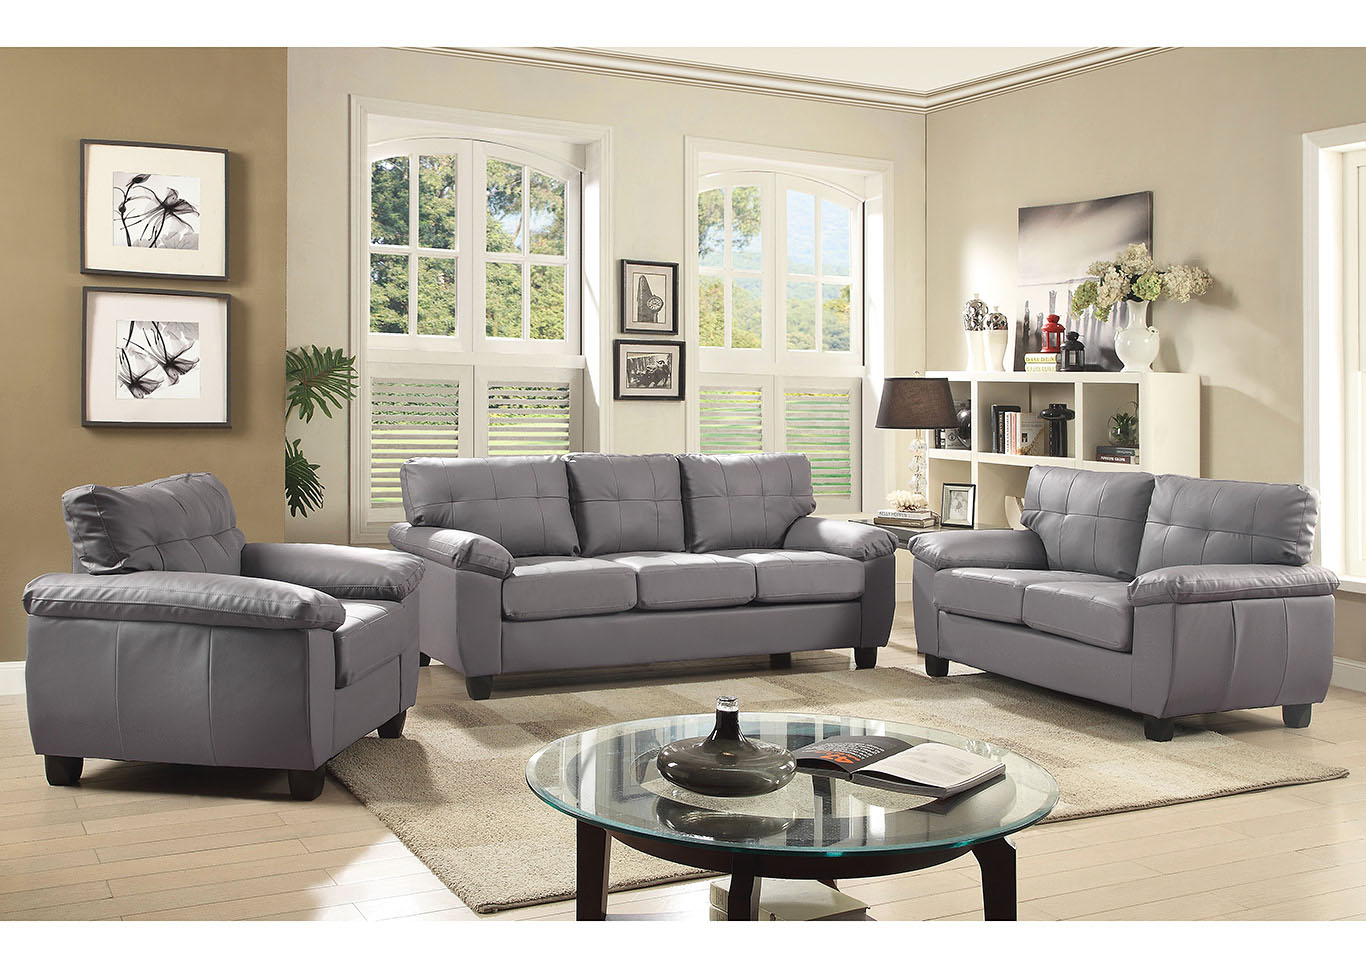 Faux Leather Sofa Set, Gray Leather Living Room Set